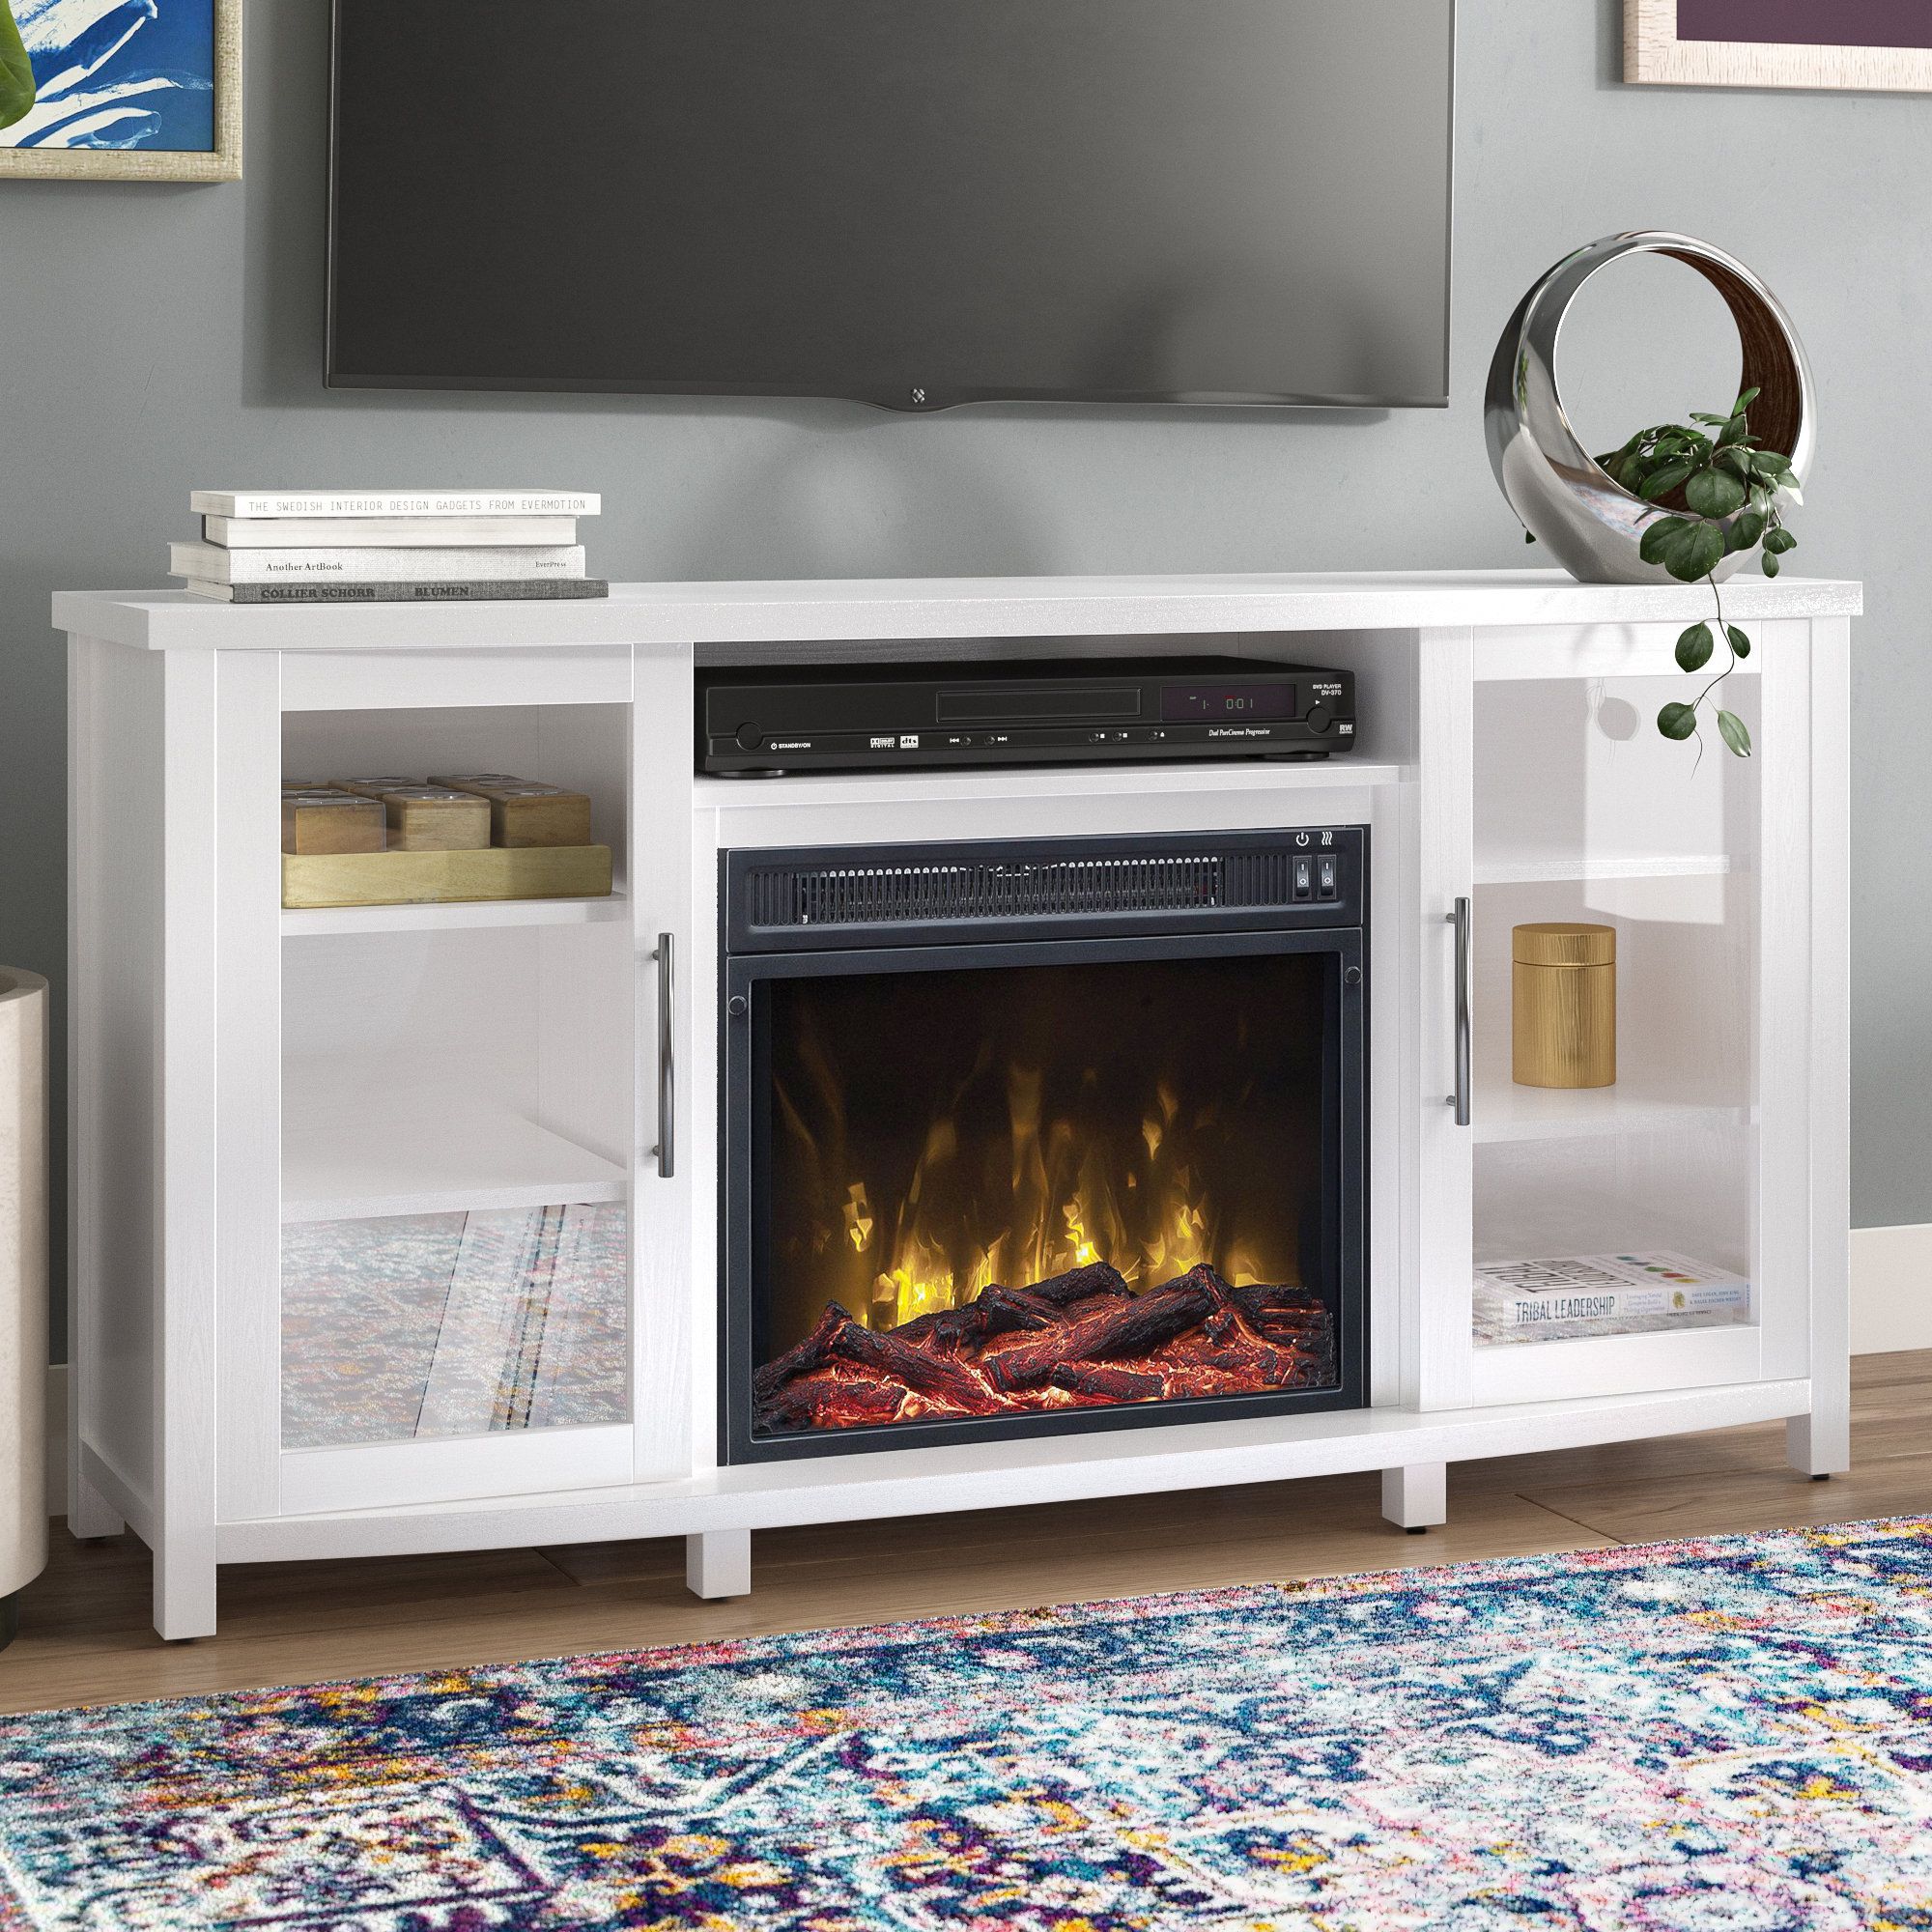 Fireplace Tv Stands & Entertainment Centers You'll Love | Wayfair (View 26 of 30)